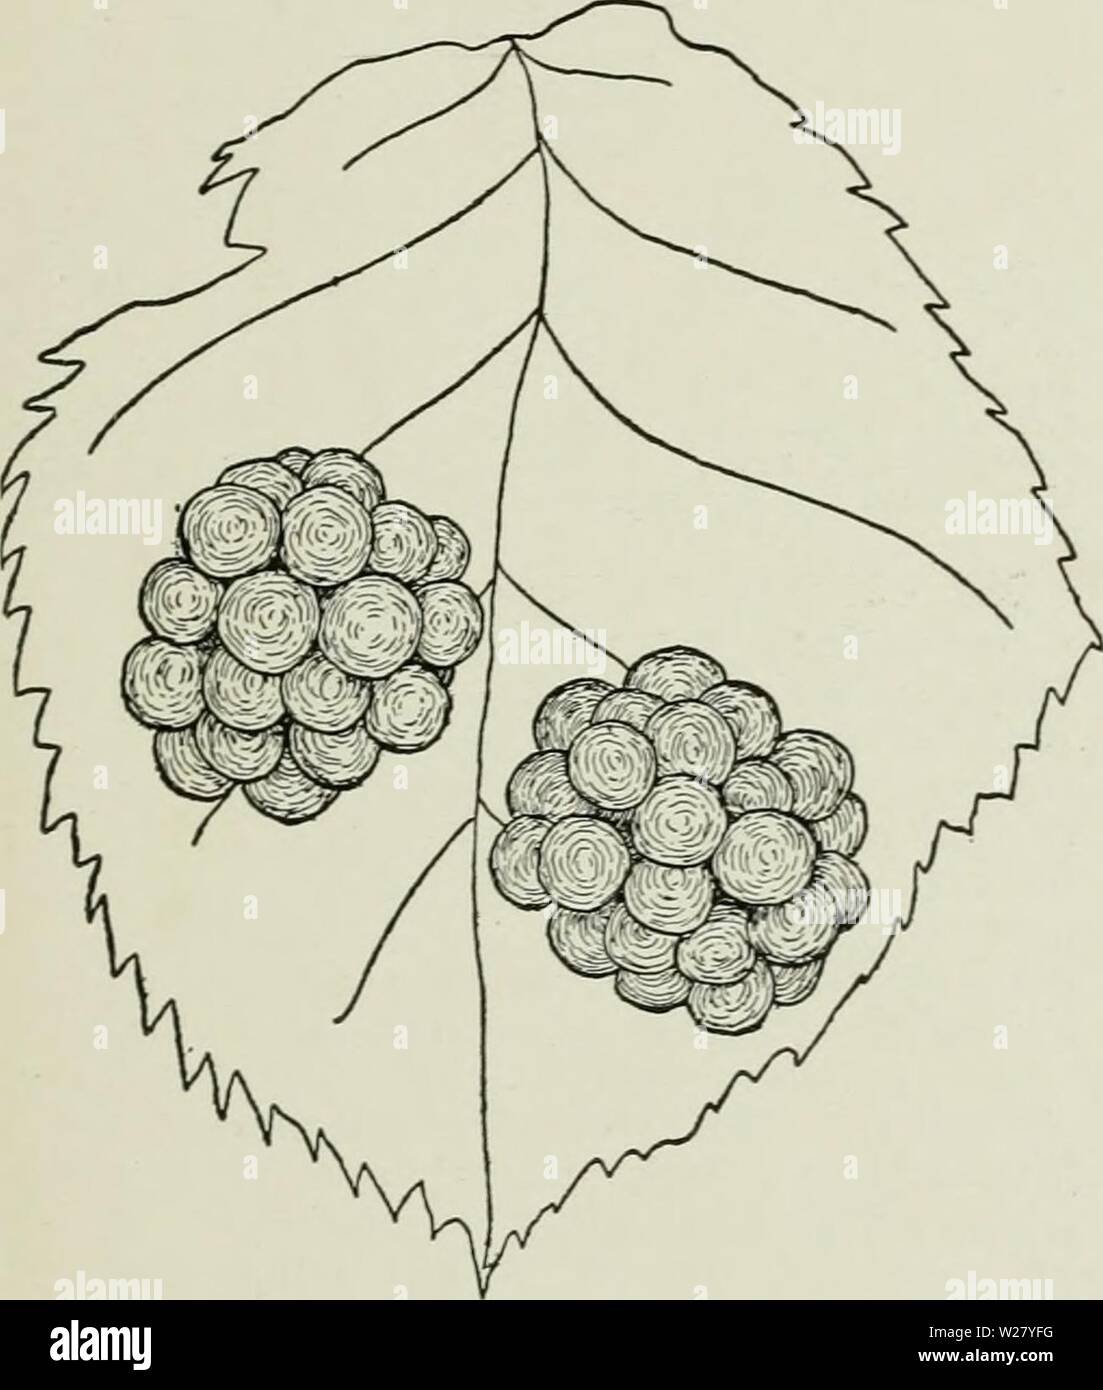 Archive image from page 330 of Cyclopedia of hardy fruits (1922). Cyclopedia of hardy fruits  cyclopediaofhar00hedr Year: 1922  GIANT HIMALAYA KITTATINNY 287 from the dreaded blackberrj'-rust. The ber- ries, when well grown, are extraordinary large, and the quality is good when the fruit is mature. Since, however, the berries remain hard and sour long after turning black, picking is often hurried, and this gives the fruit the reputation of being poor in quality. The original plant of Erie was found near Tall- madge, Ohio, about 1876. It is probably a seedling of the older Lawton, which it re- Stock Photo